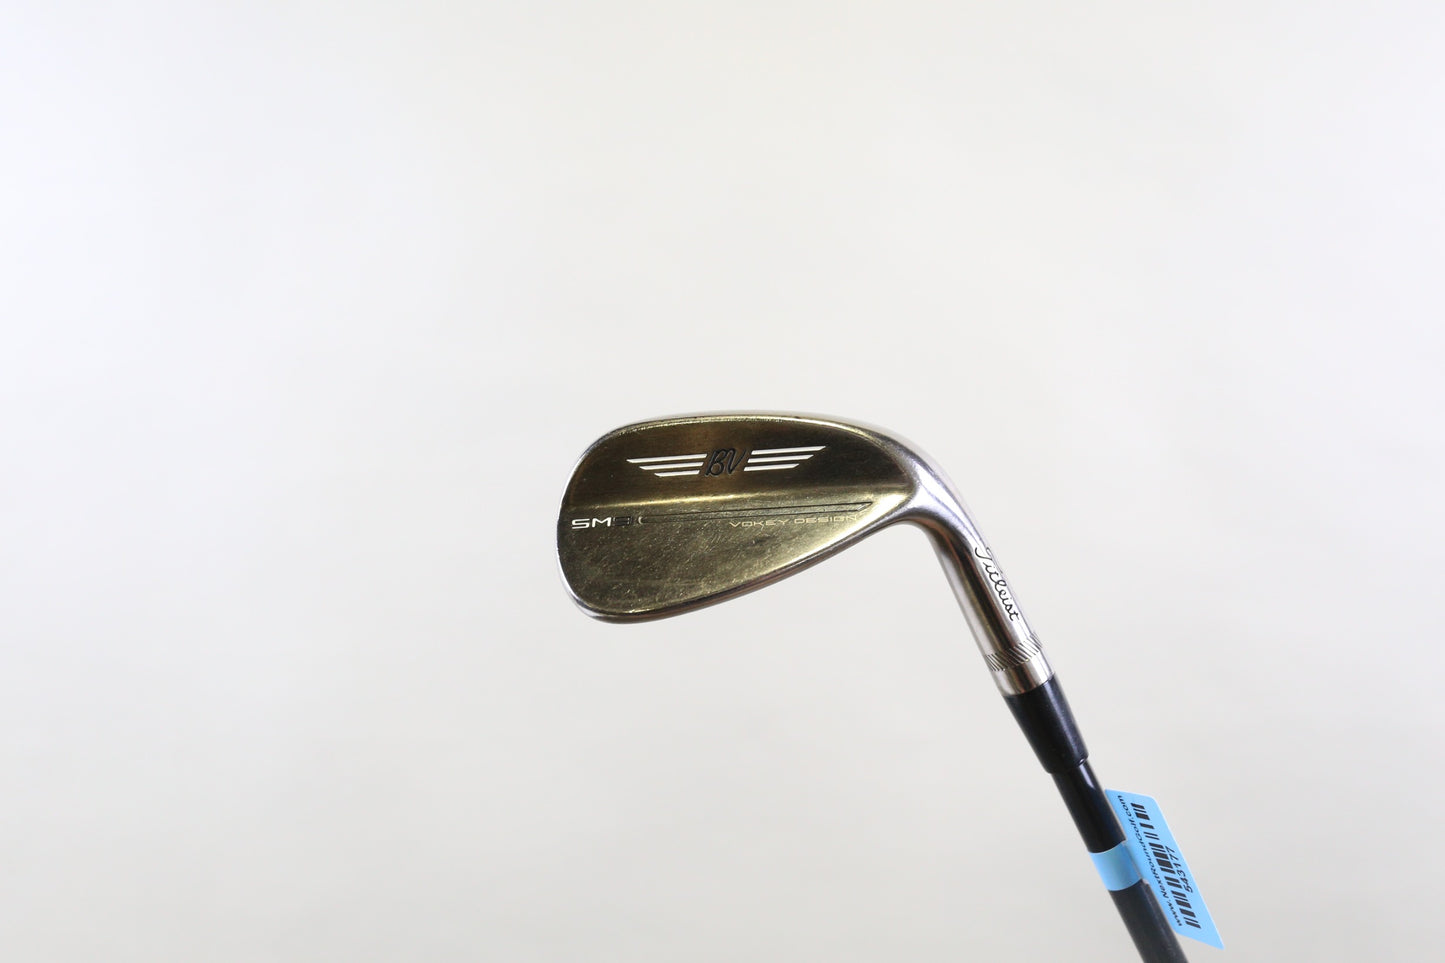 Used Titleist Vokey SM9 Brushed Steel F Grind Pitching Wedge - Right-Handed - 48 Degrees - Regular Flex